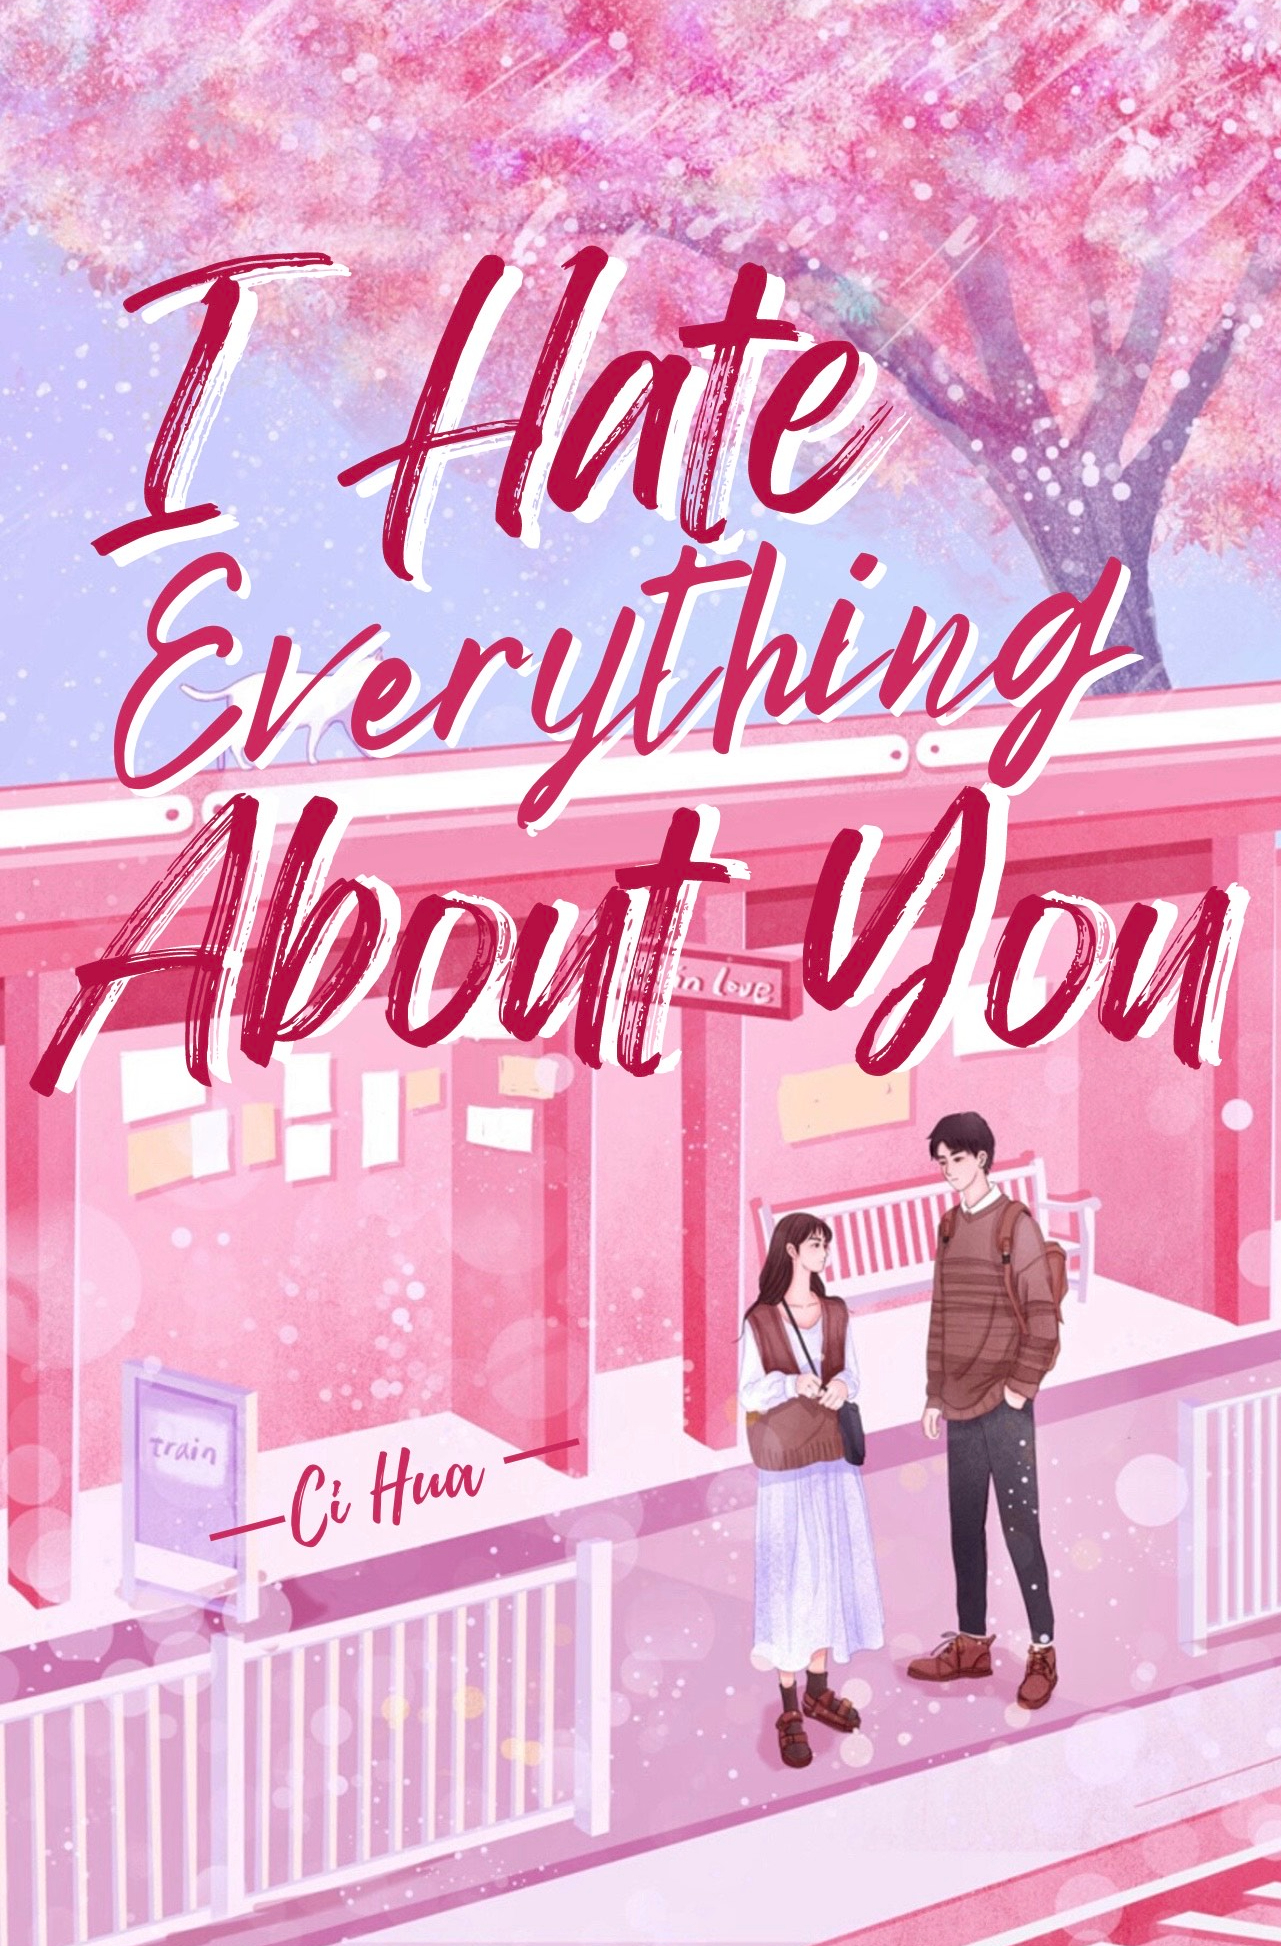 I Hate Everything About You